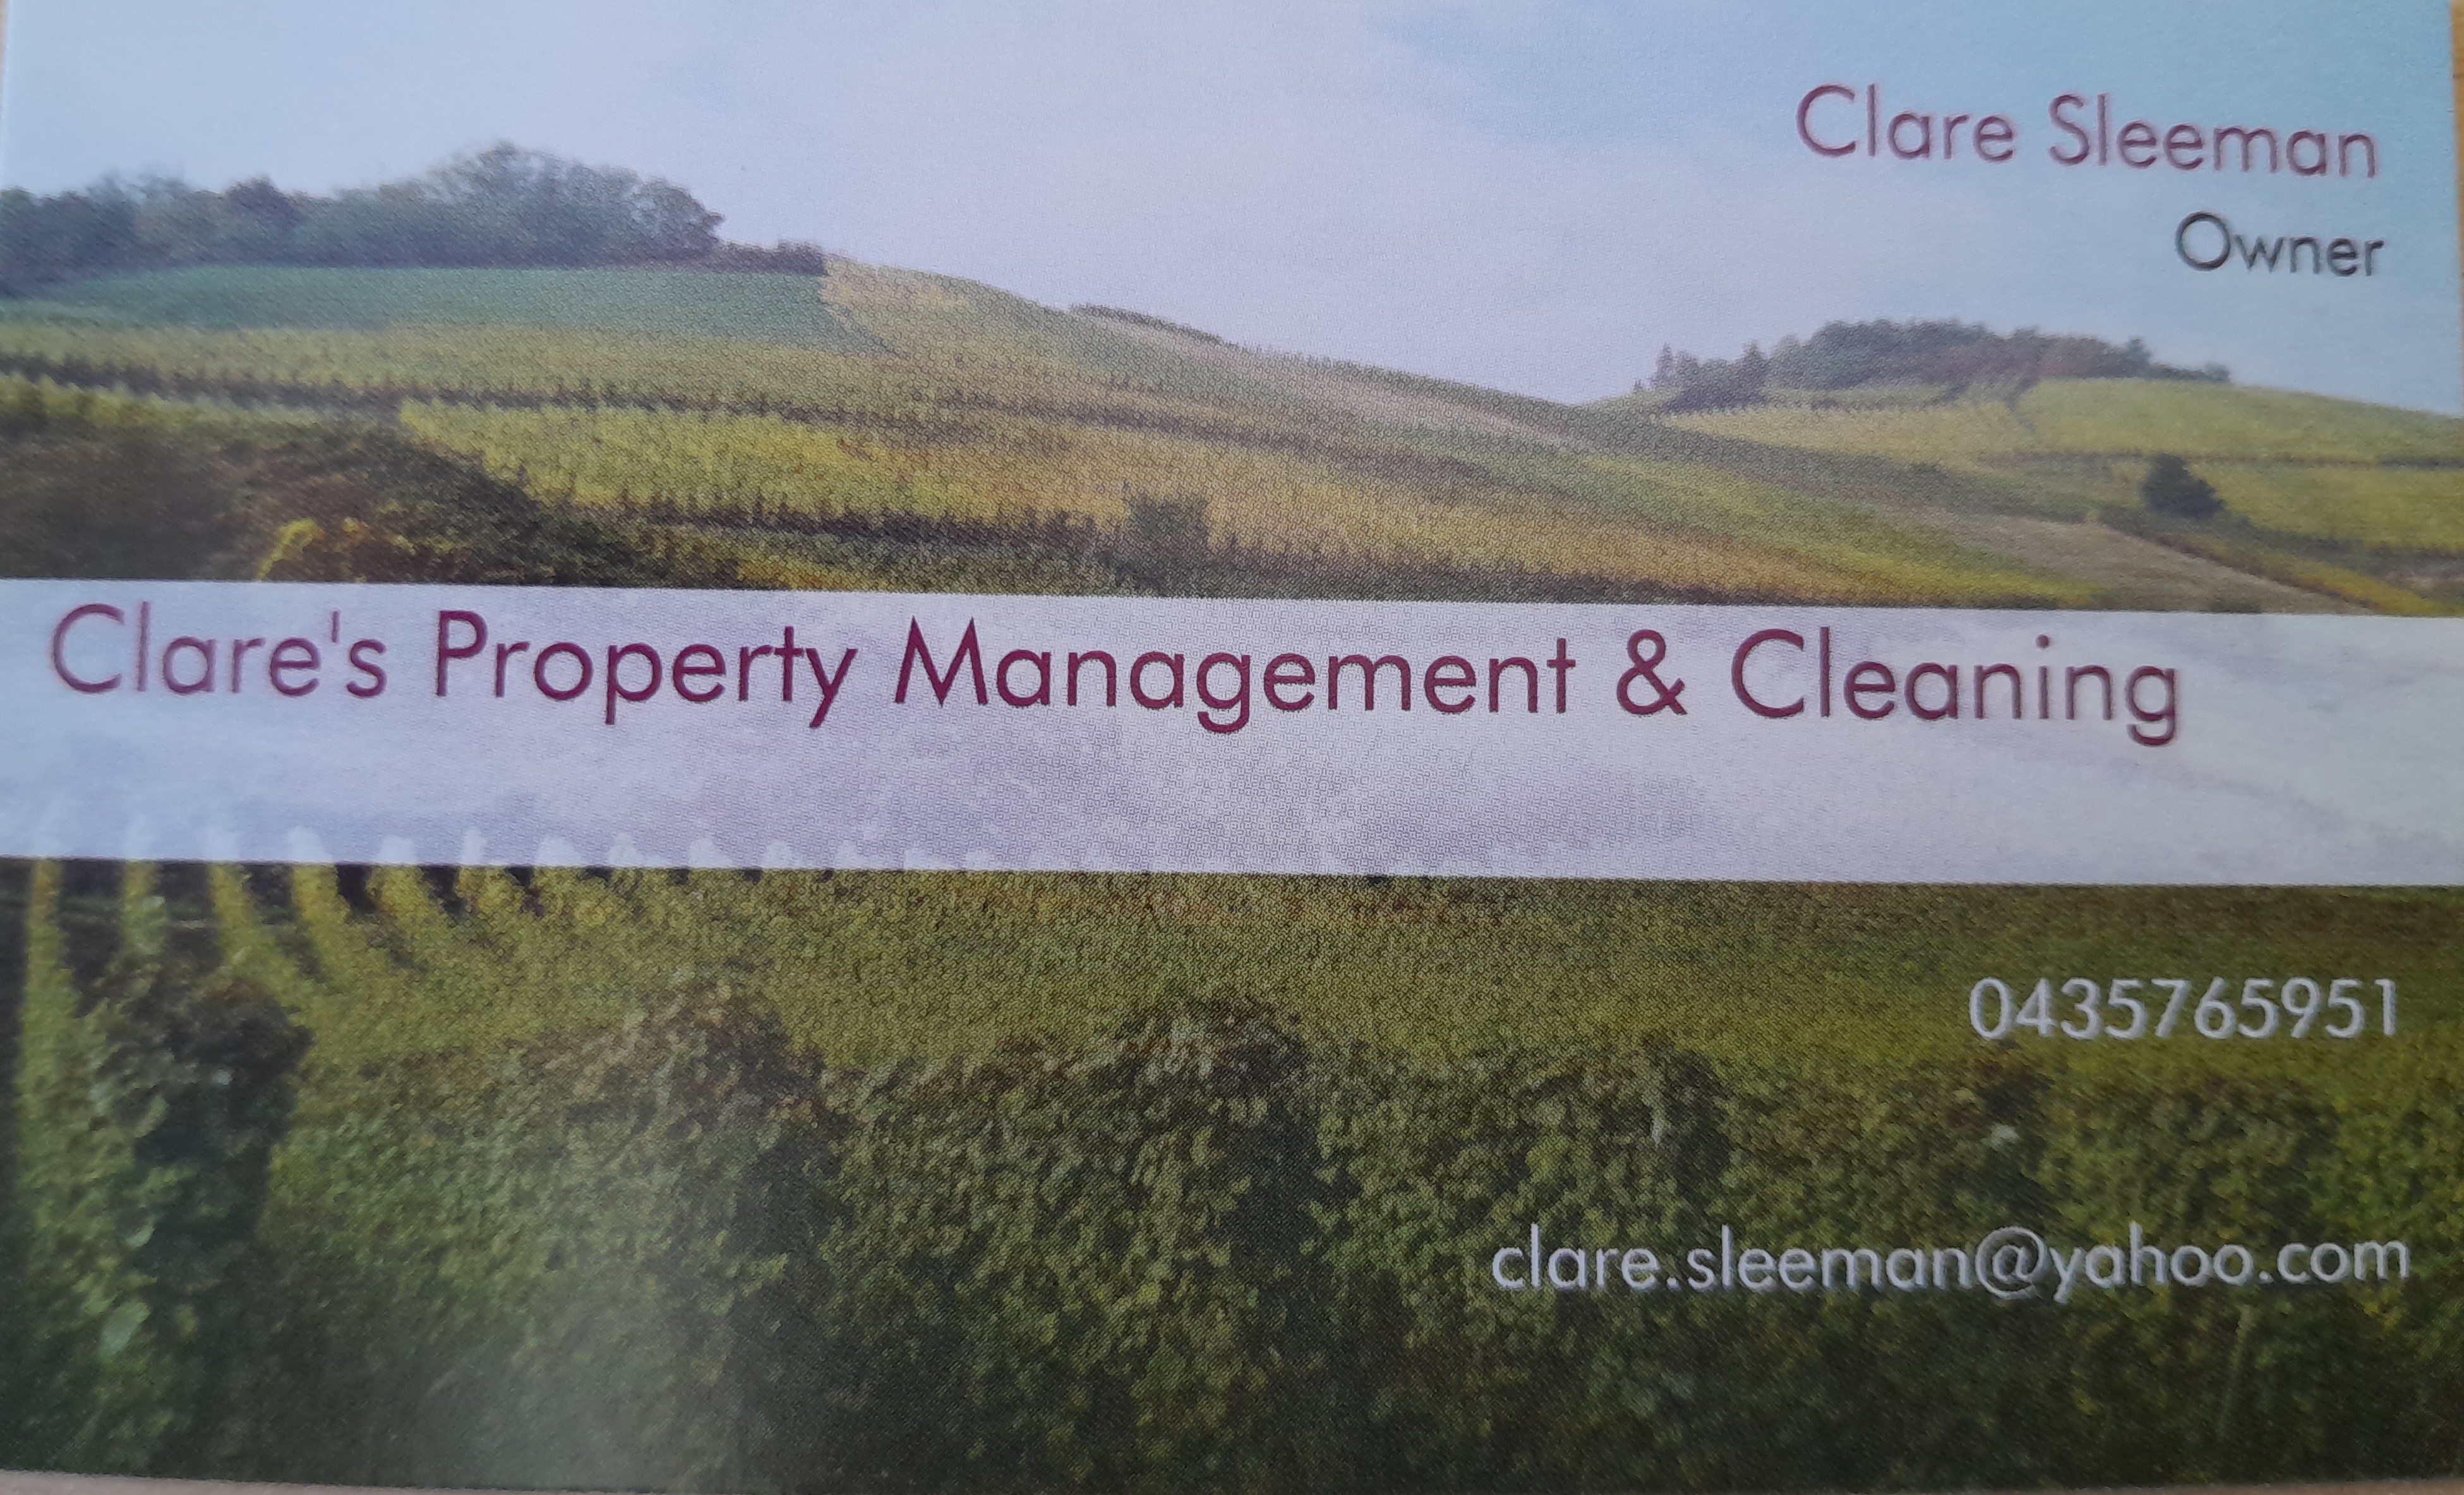 Clares property management and cleaning